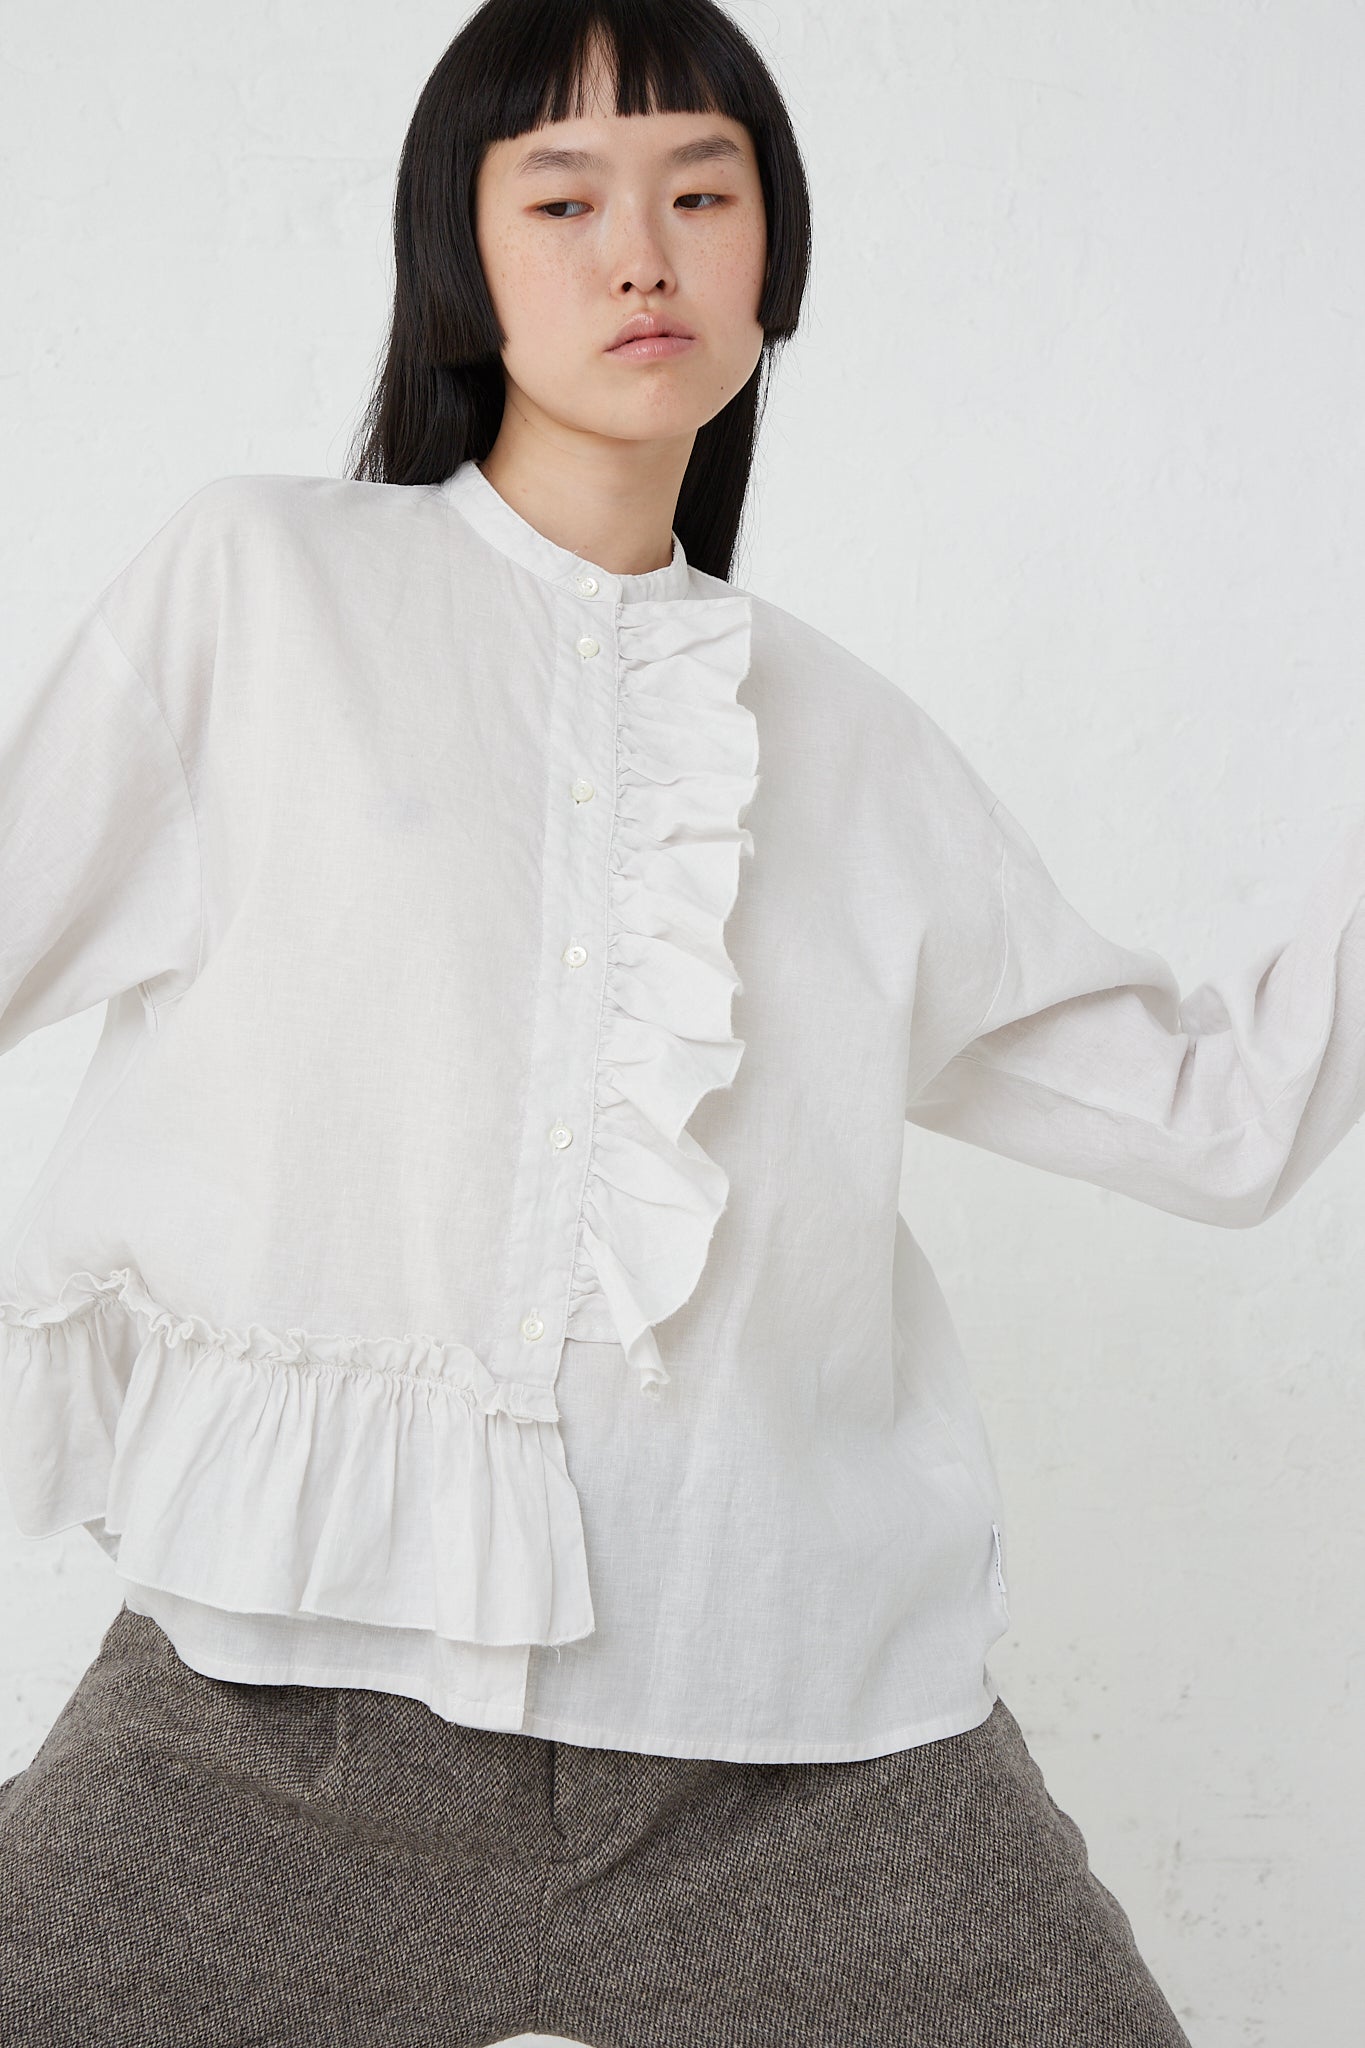 The model is wearing a nest Robe UpcycleLino Linen Gathered Frill Blouse in Off White with ruffles made from an upcycled linen and cotton blend.